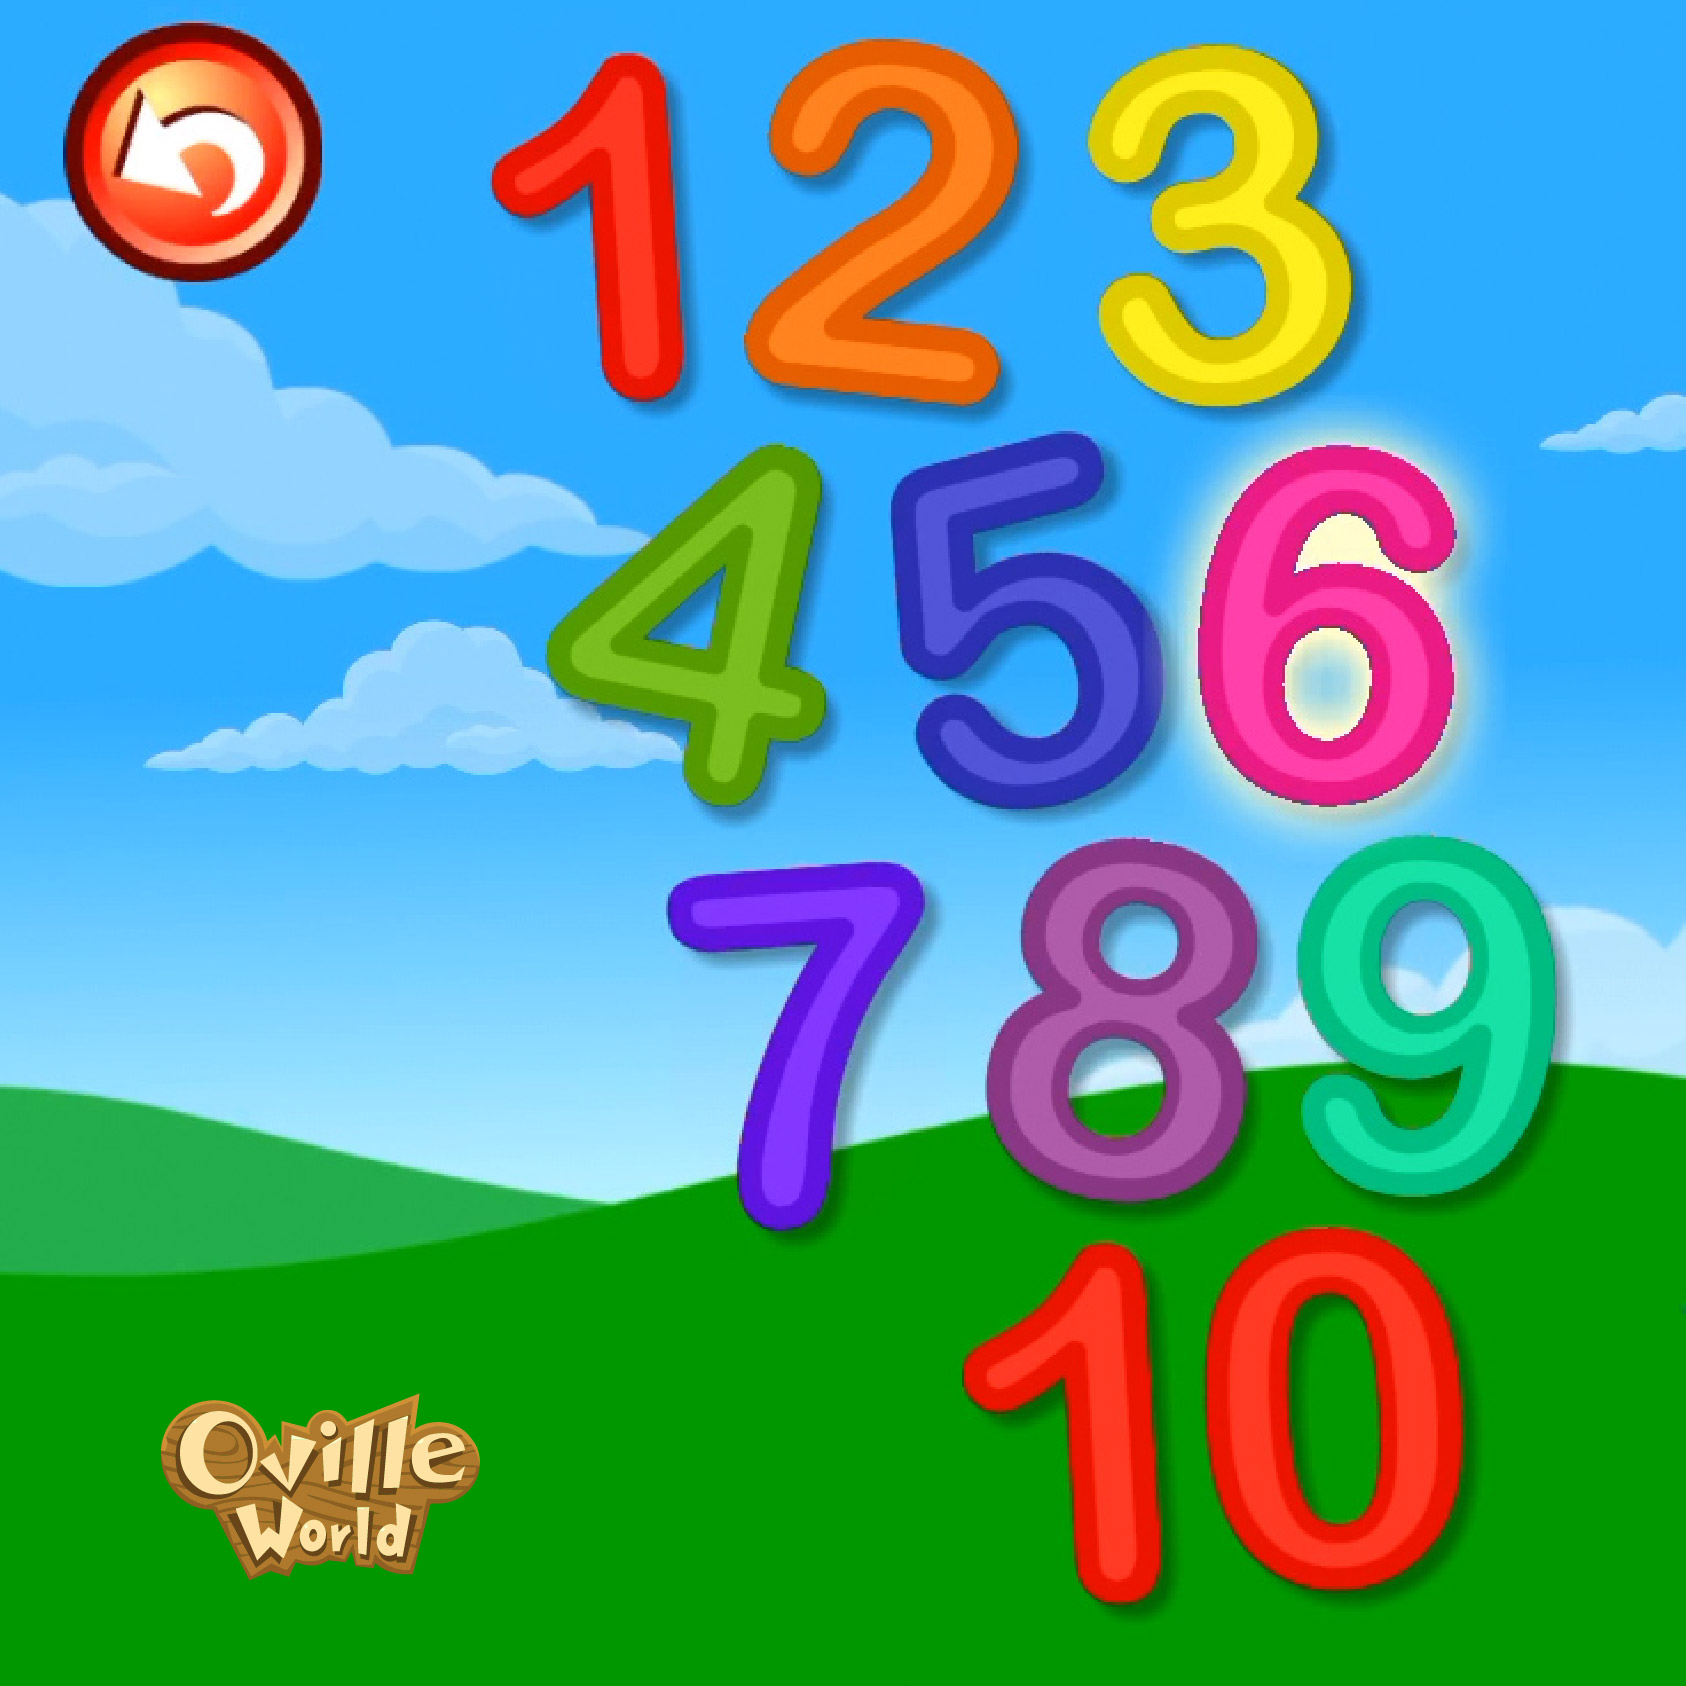 Learn Numbers and Counting in Oville World Learning App for Toddlers